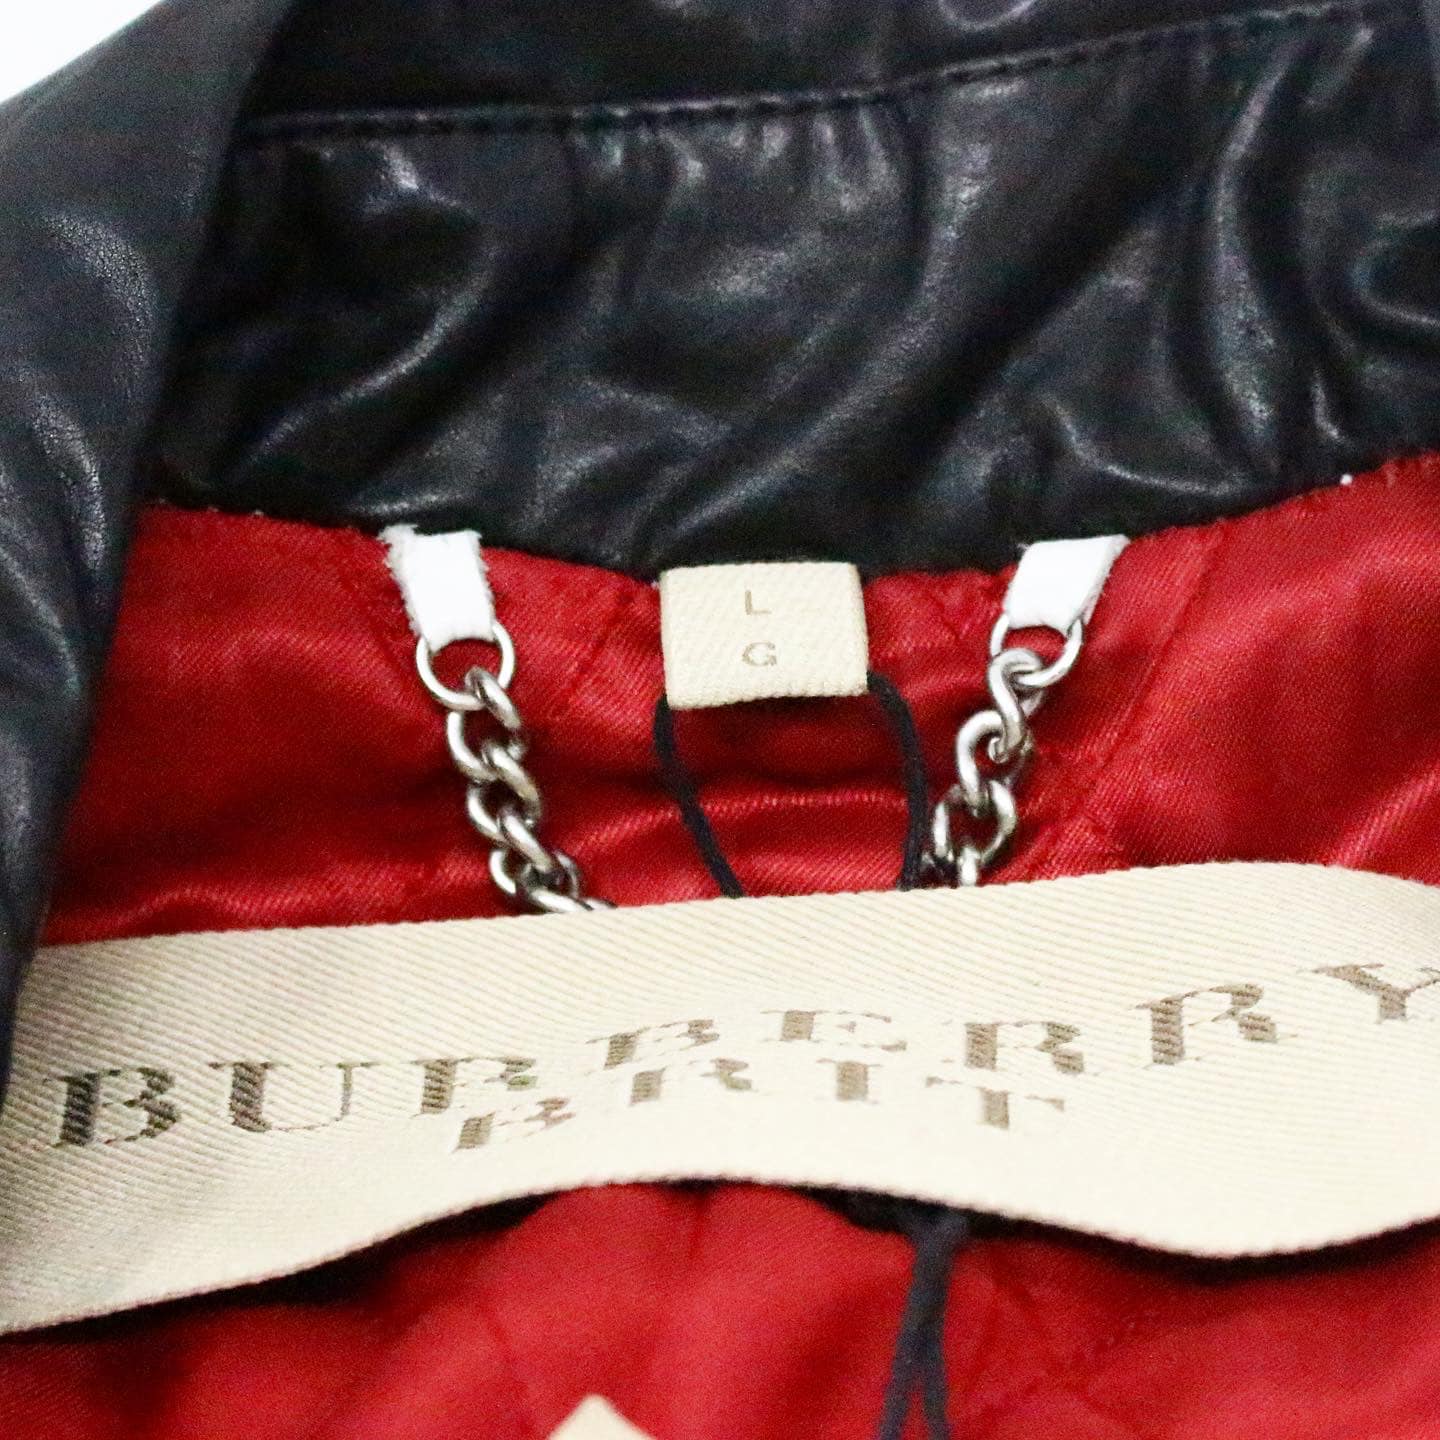 Burberry Chain-Link Detail Leather Jacket - Black